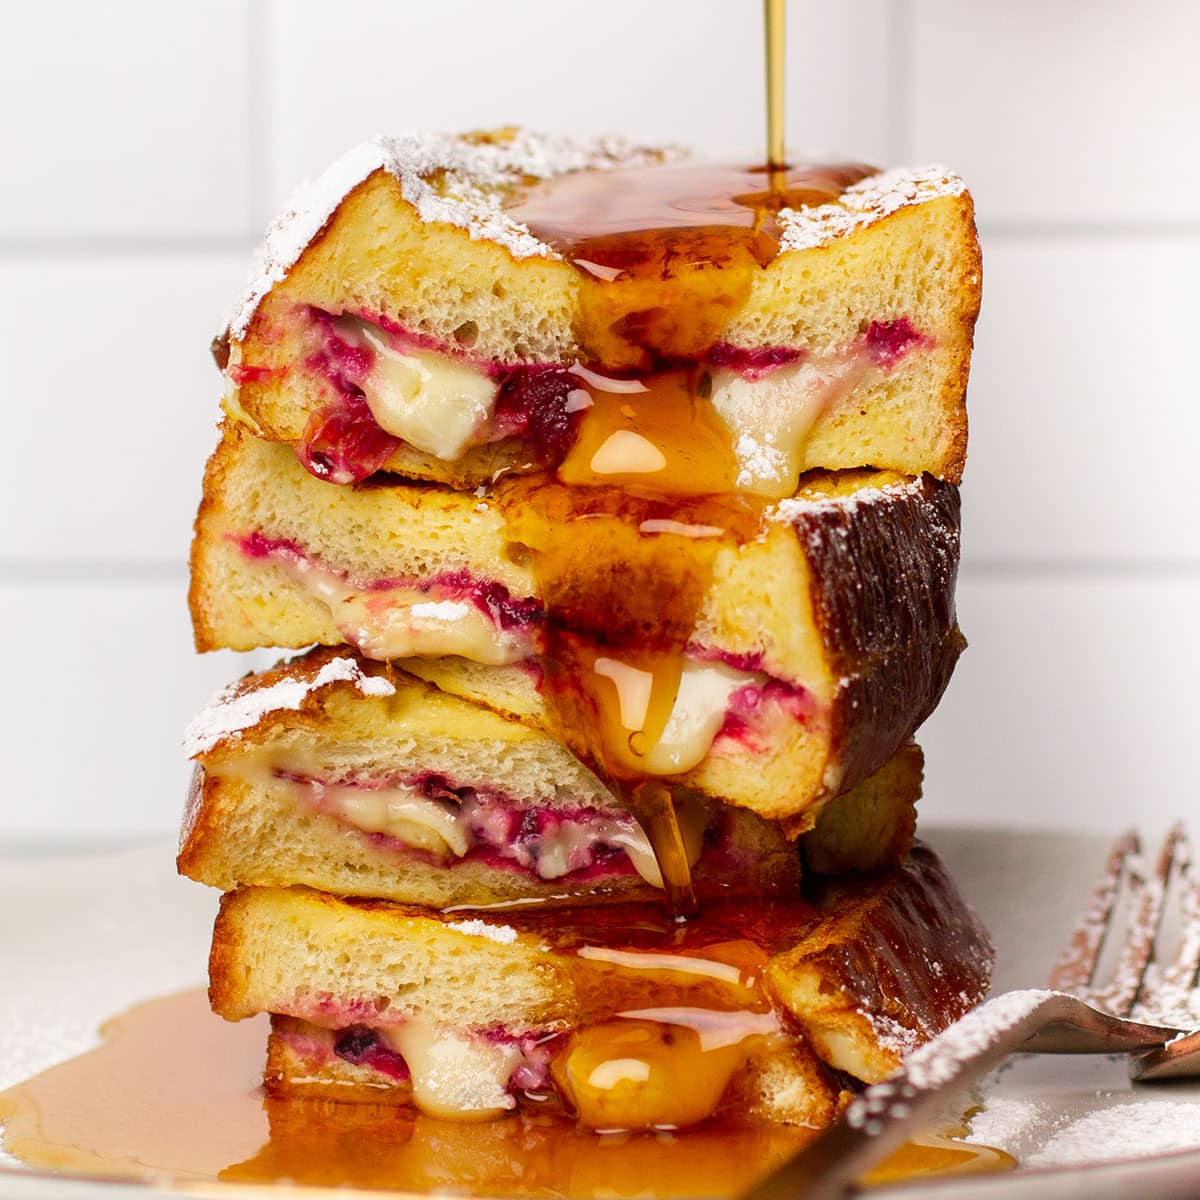 Pouring syrup over a stack of french toast.